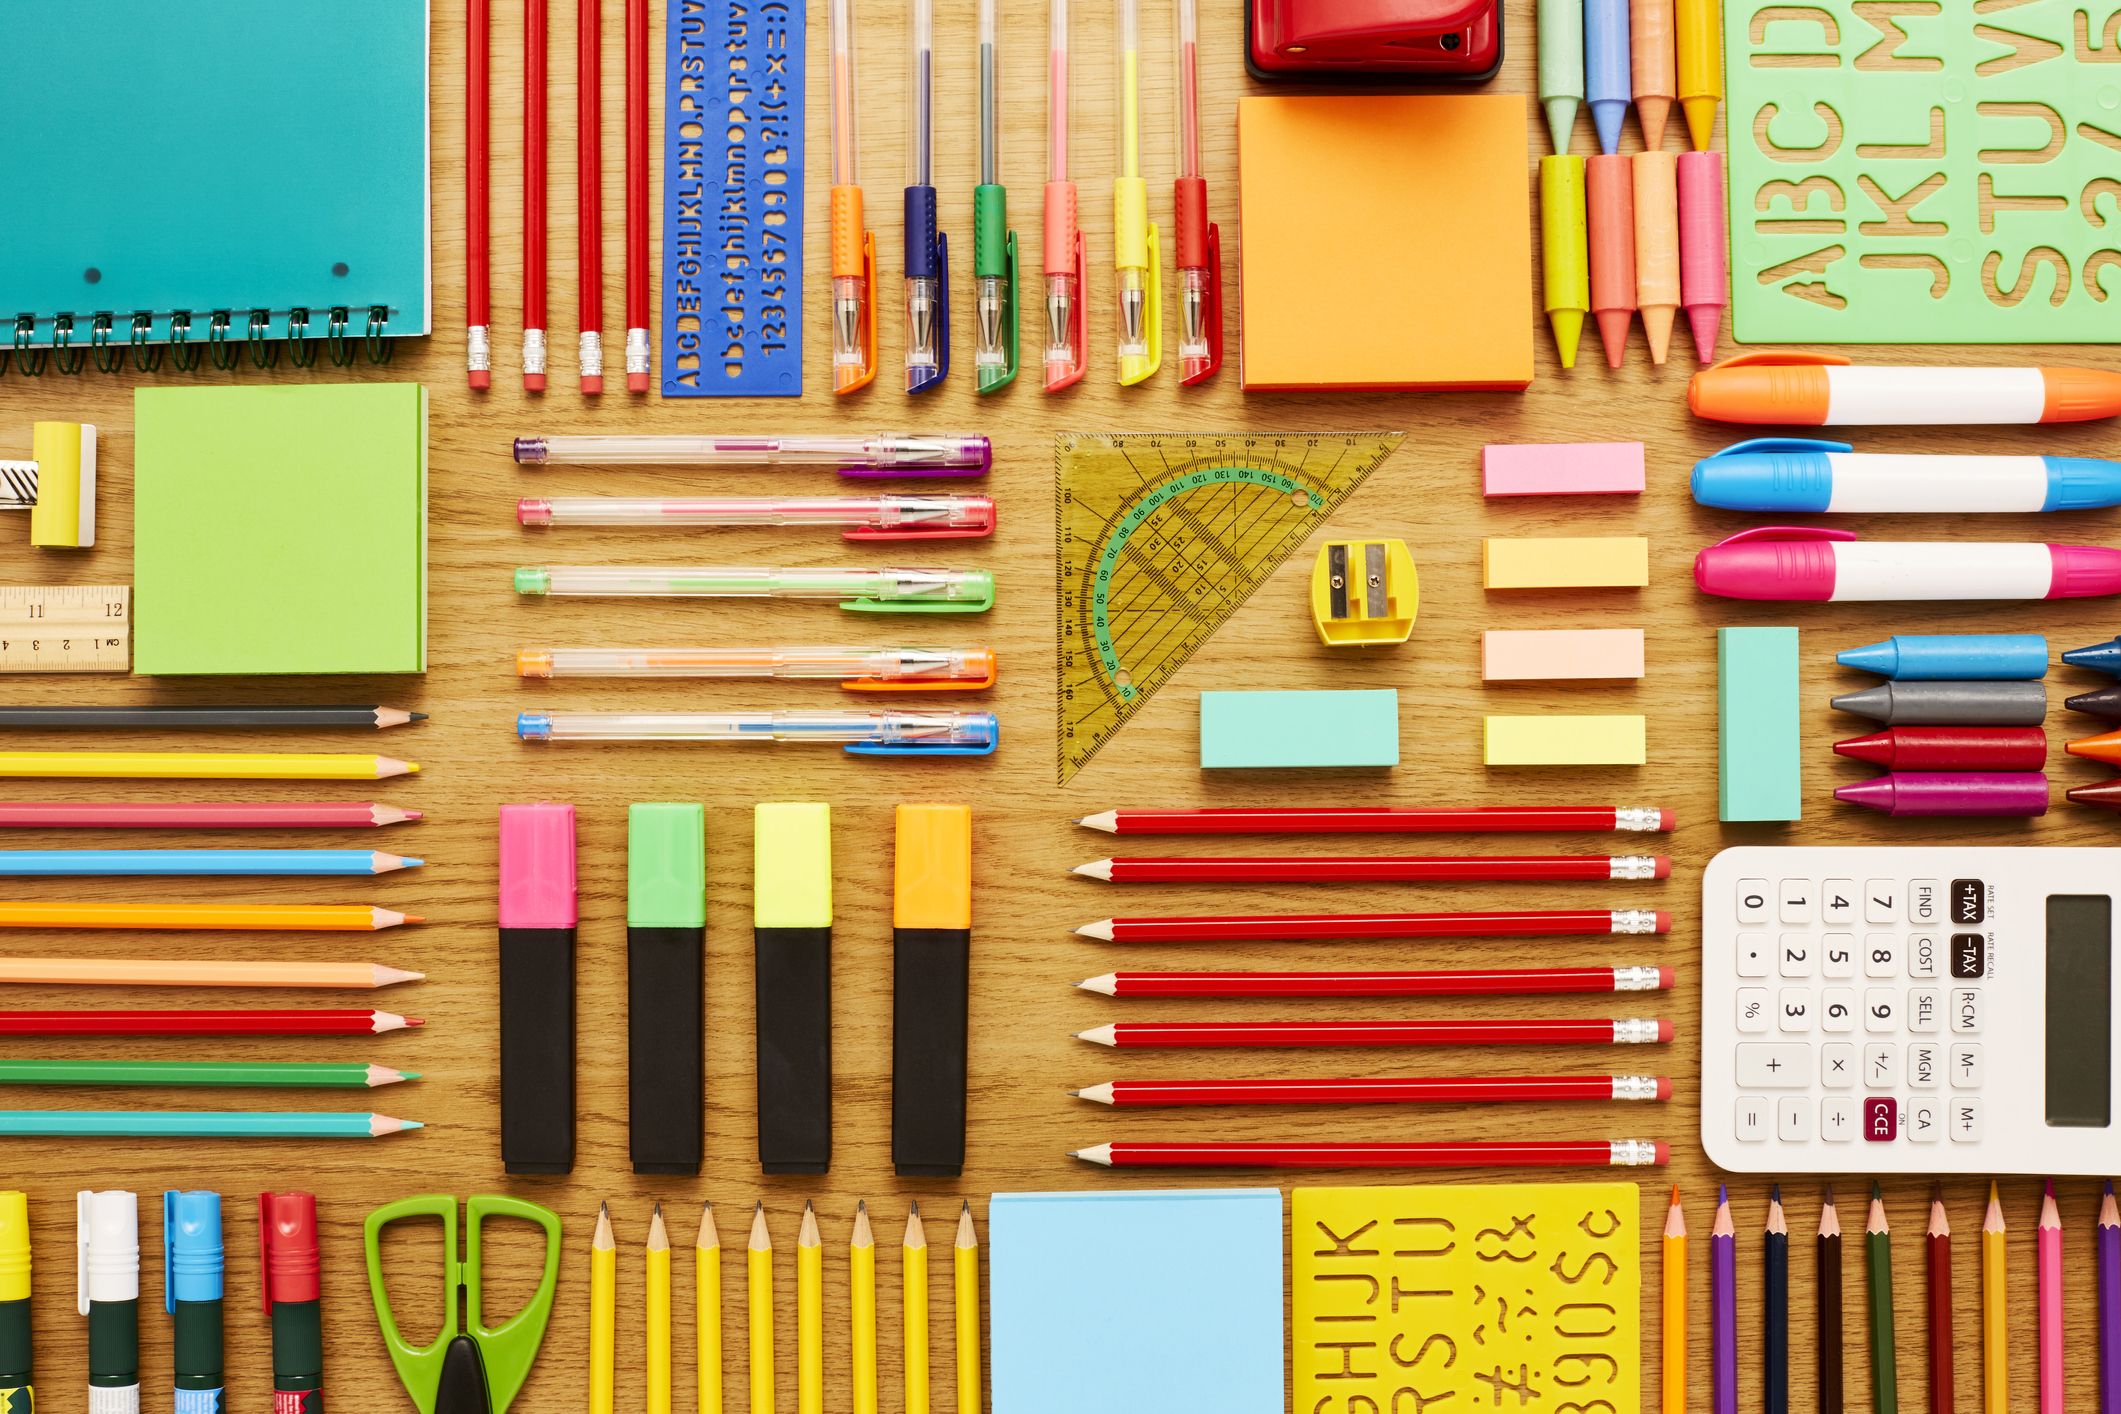 https://hips.hearstapps.com/hmg-prod/images/office-and-school-supplies-arranged-on-wooden-table-royalty-free-image-1687558904.jpg